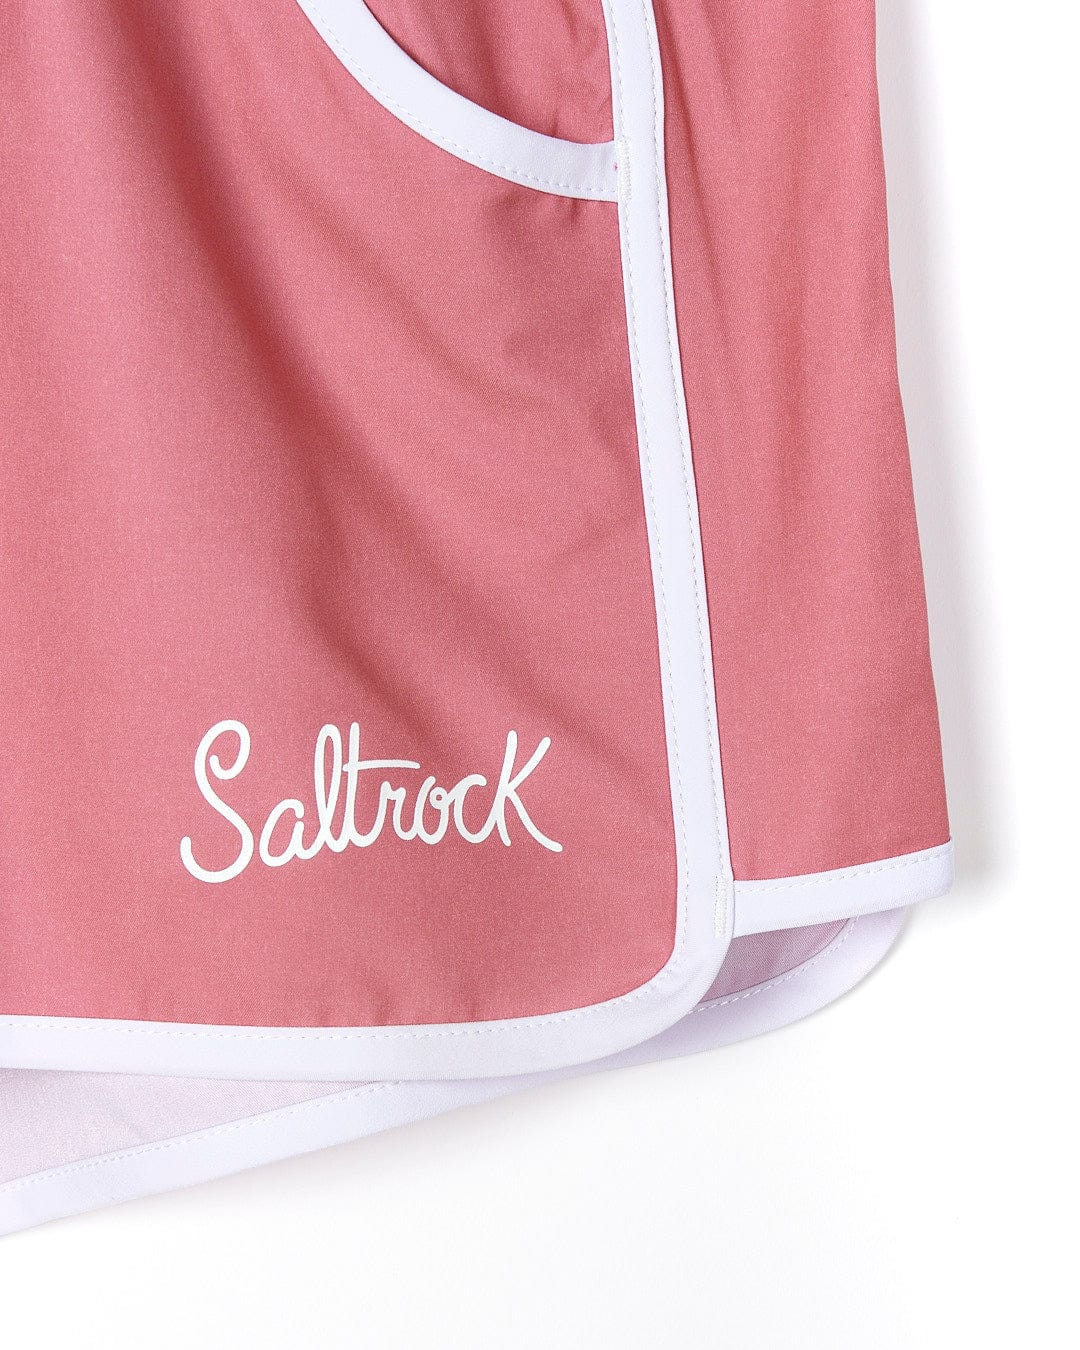 A pink elasticated waist Fonte Volley - Womens Boardshort with the word Saltrock on it.